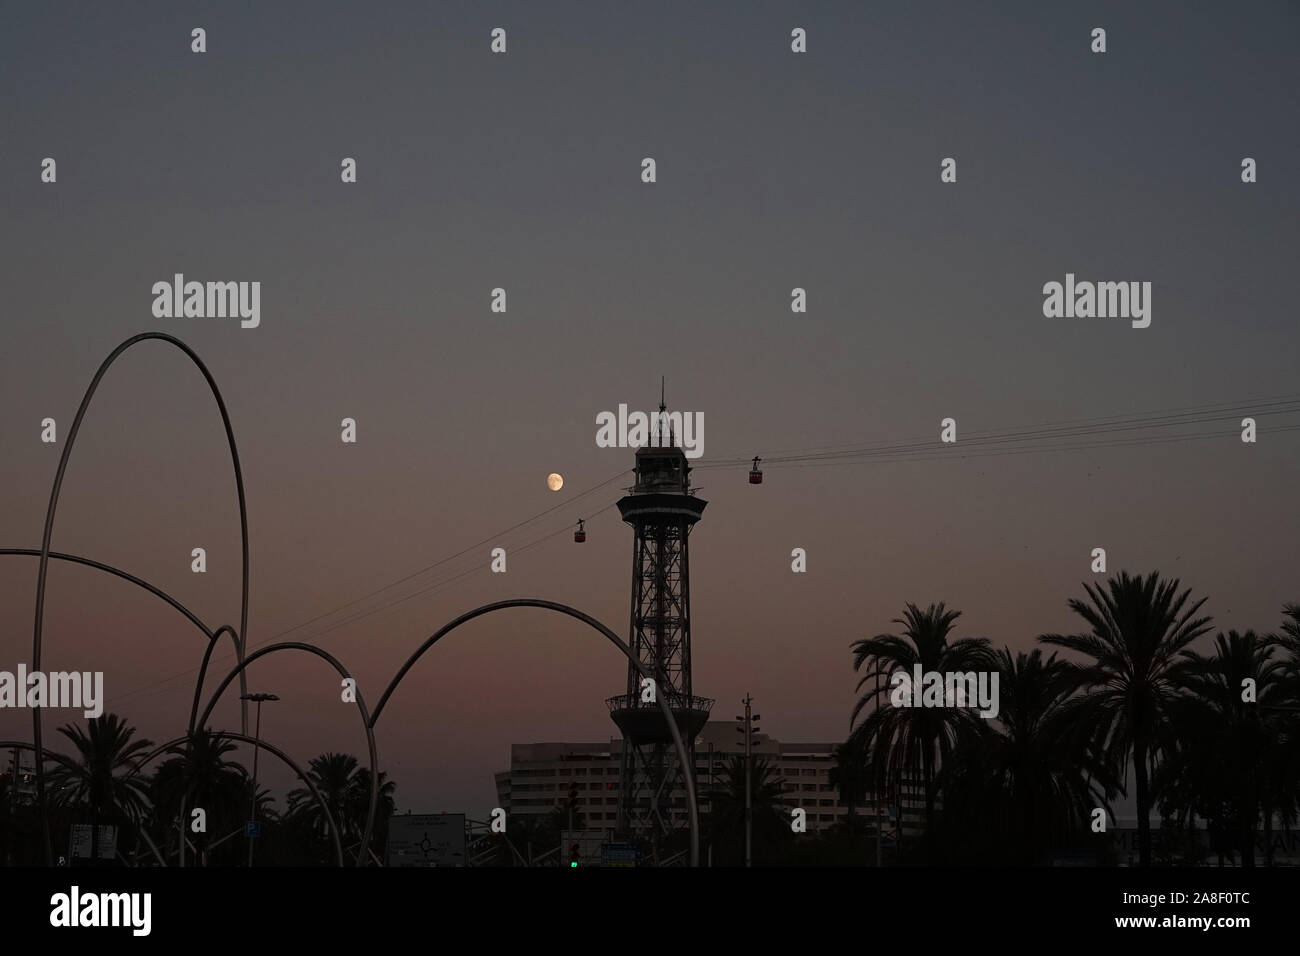 Silhouette of Barcelona cable car tower, palm trees, the moon & structures at sunset Stock Photo